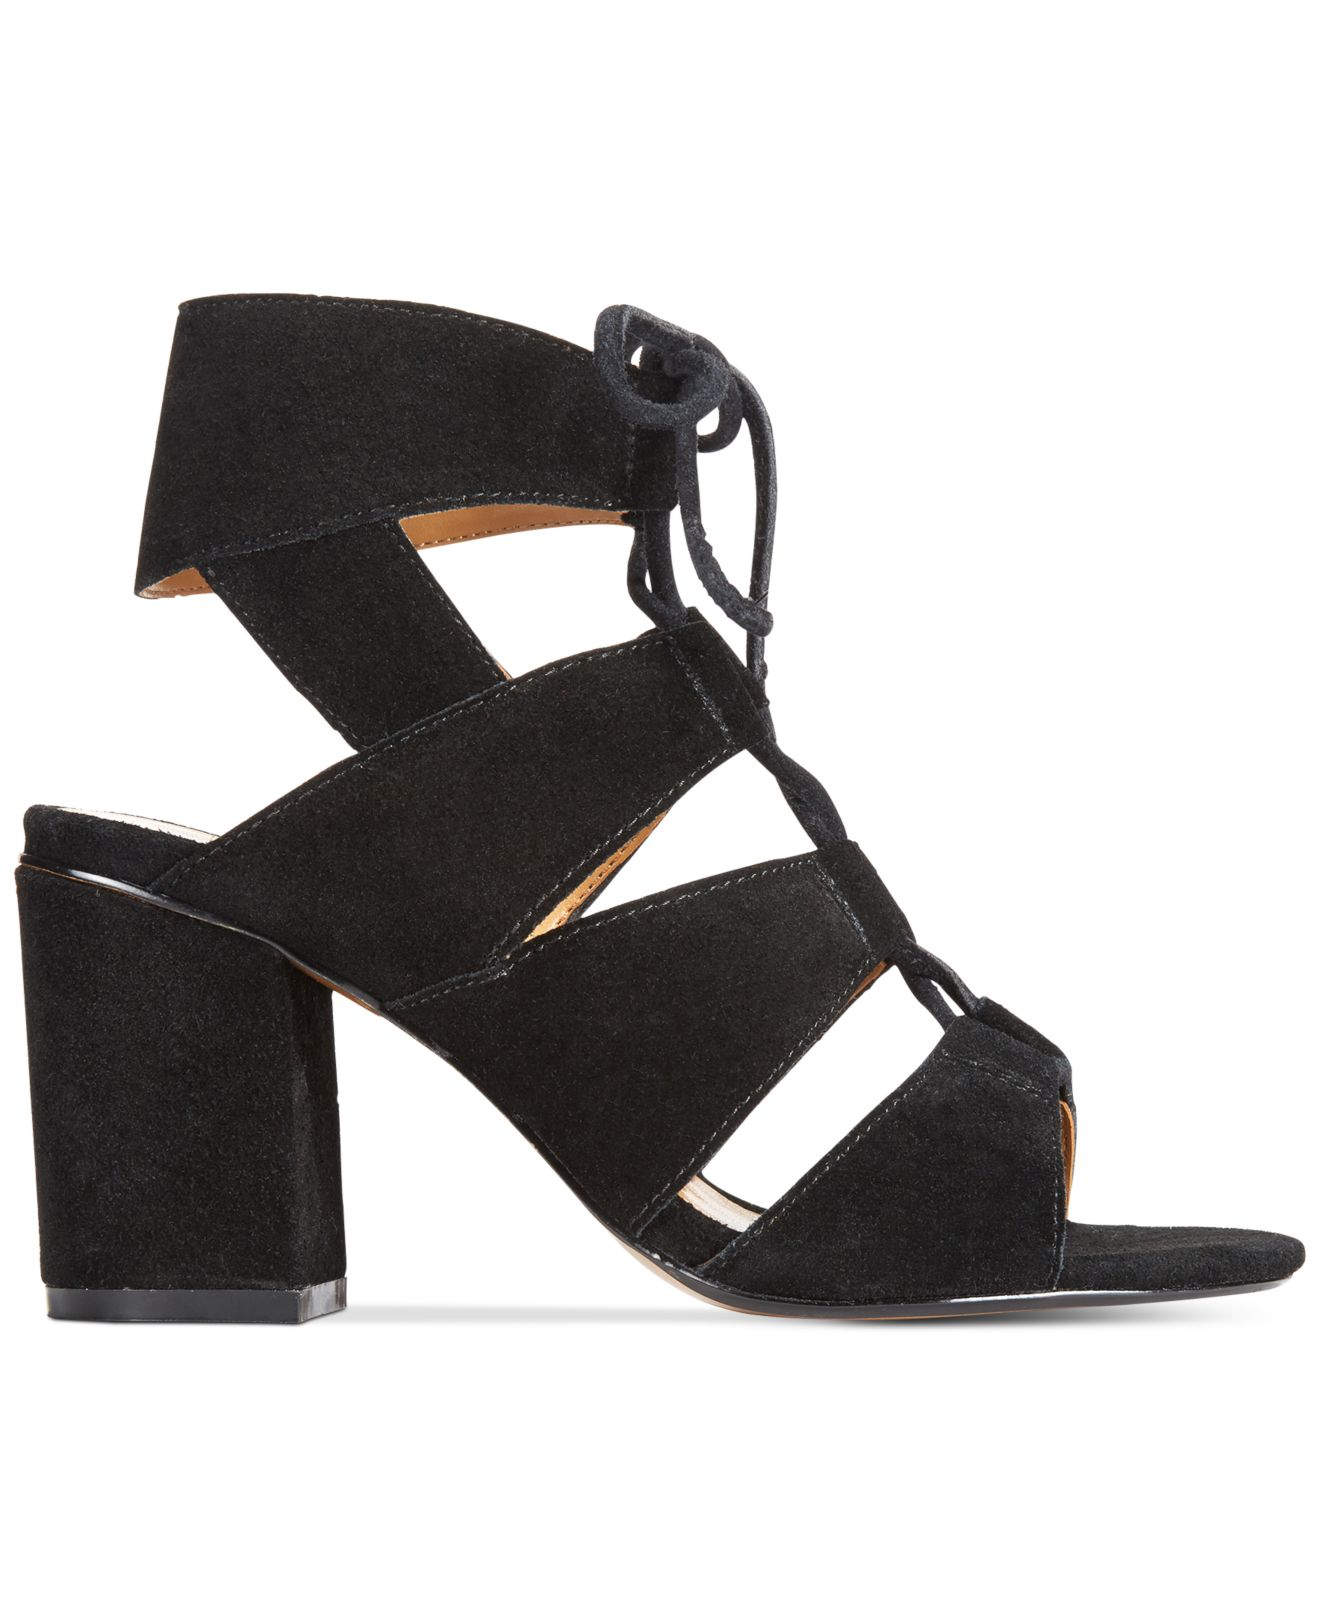 Lyst Report Edolie Block  Heel  Lace up Sandals  in Black